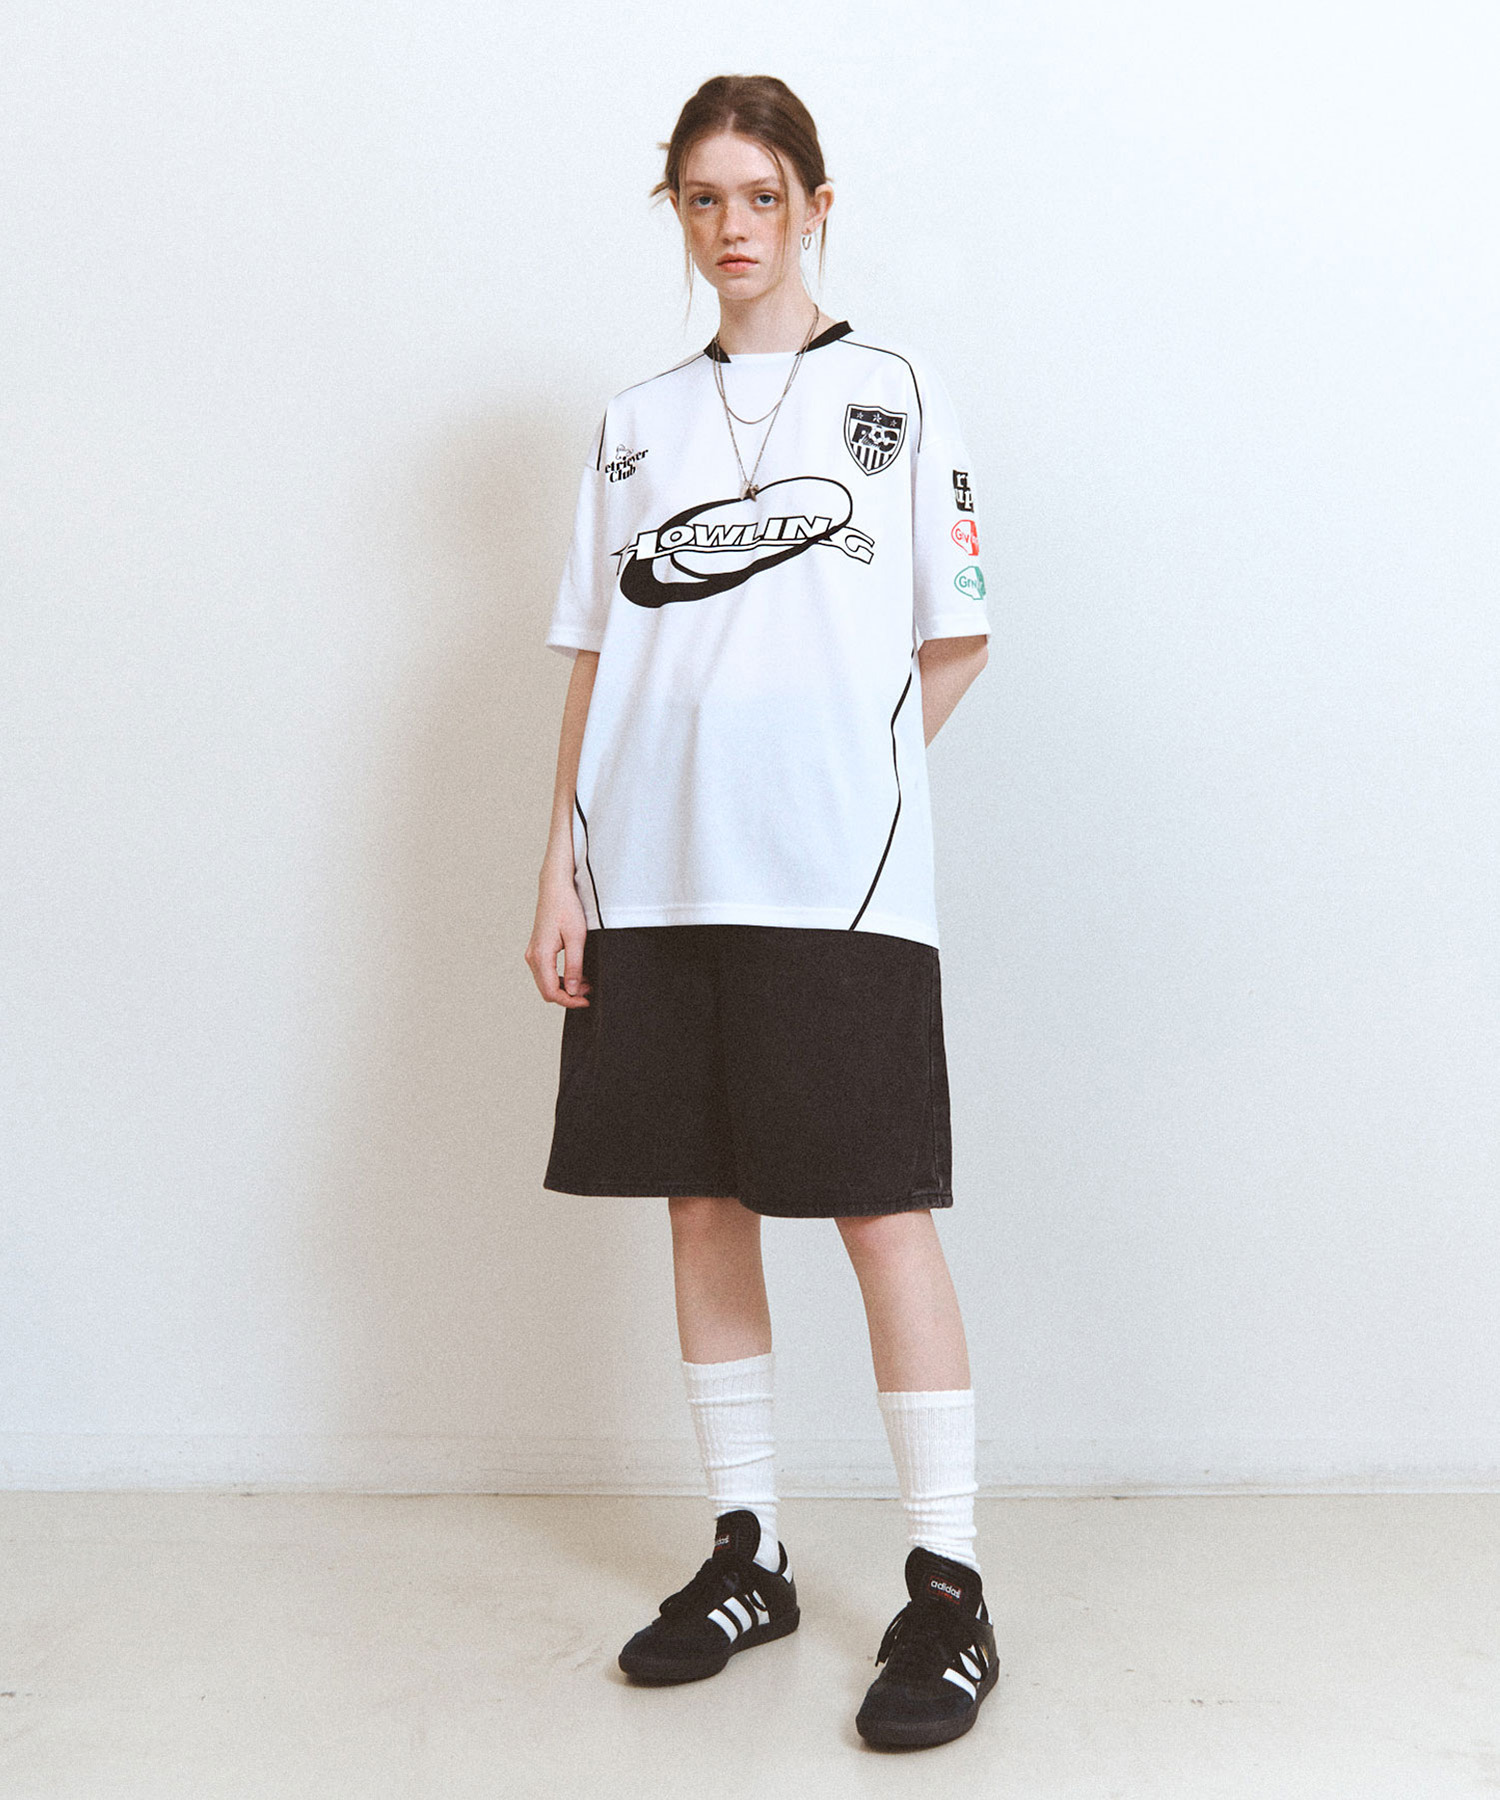 HOWLING SOCCER JERSEY [WHITE]